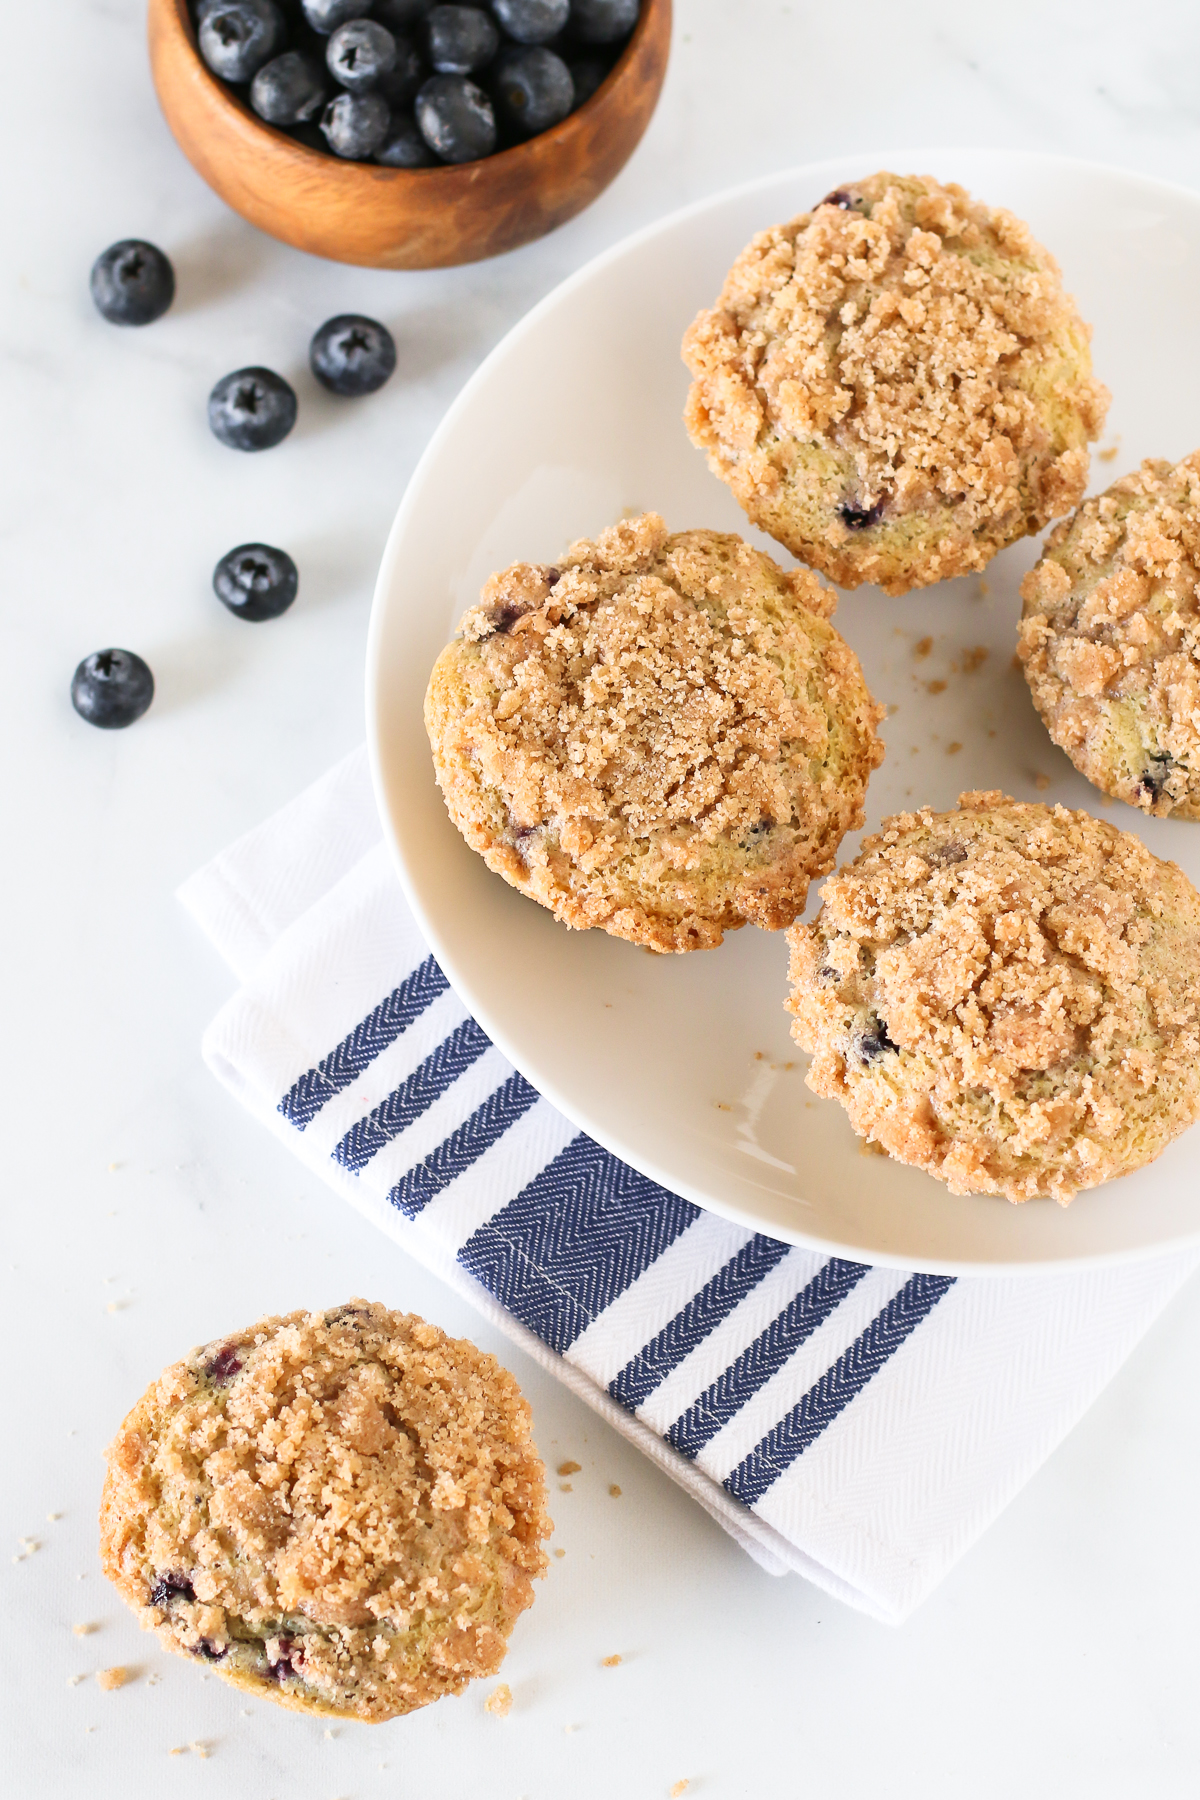 Gluten Free Vegan Blueberry Crumb Muffins. Tender muffins with sweet blueberries, with a beautiful cinnamon crumb topping.